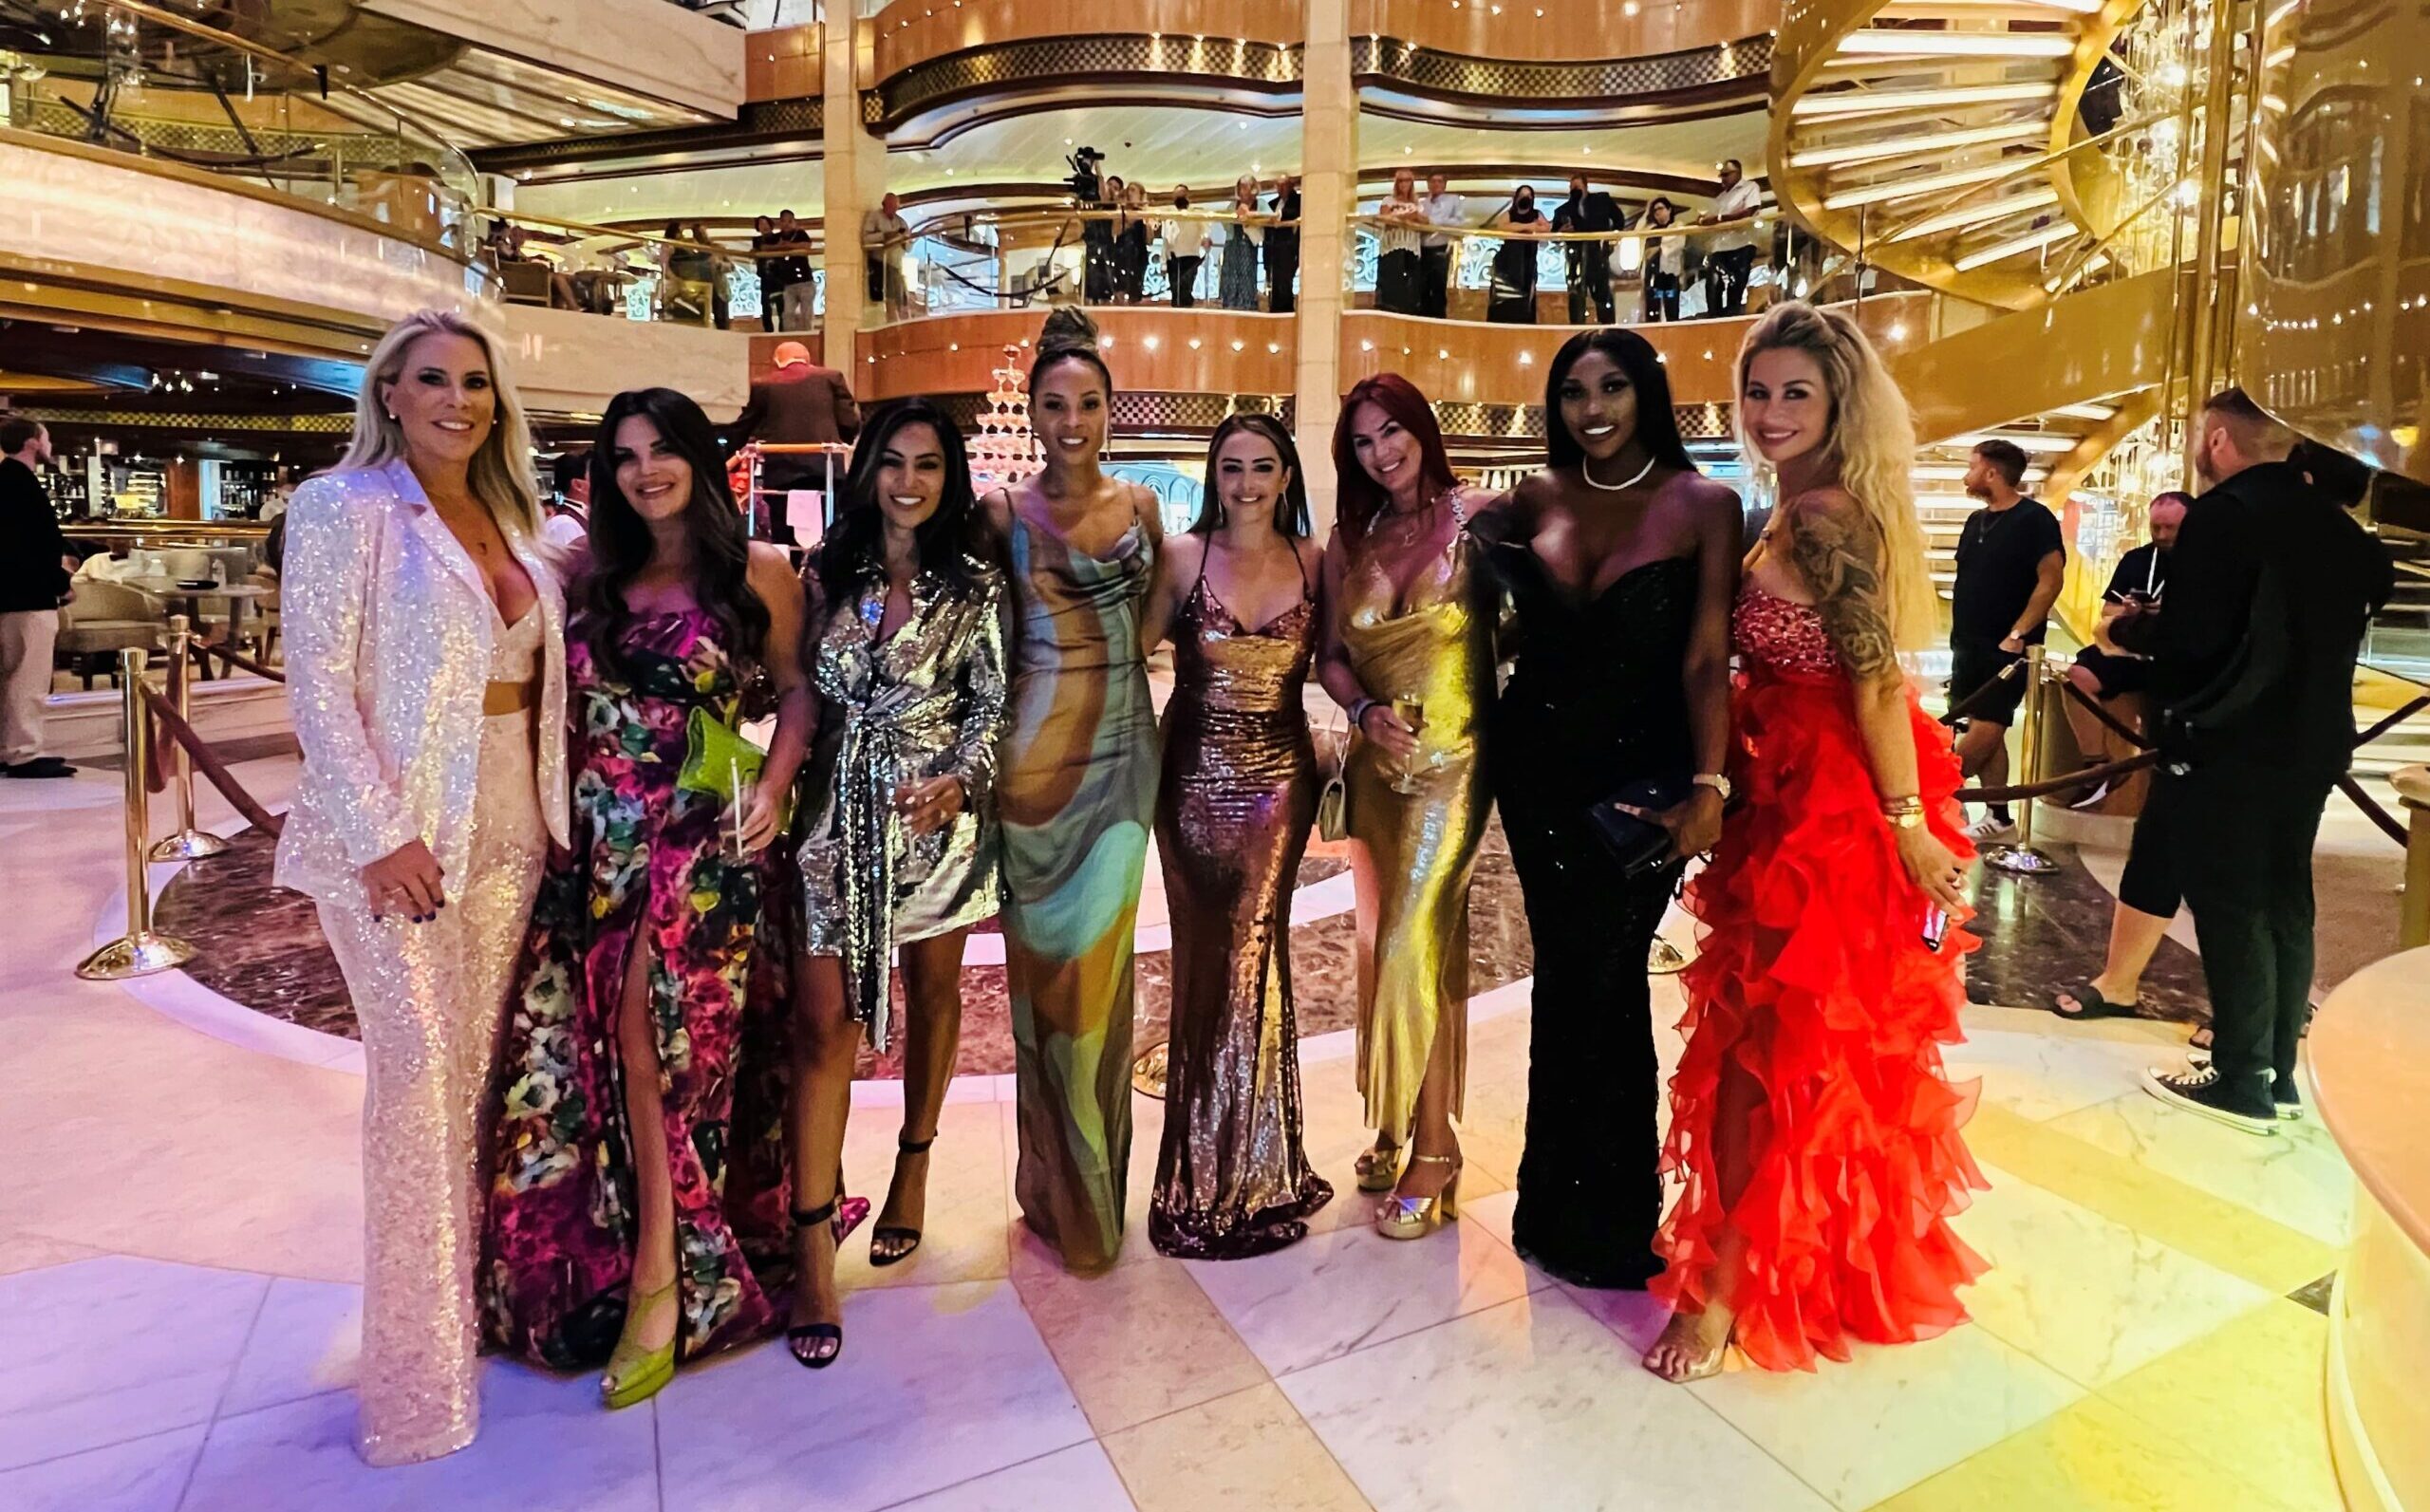 The Real Housewives of Cheshire: Christmas Cruising cast